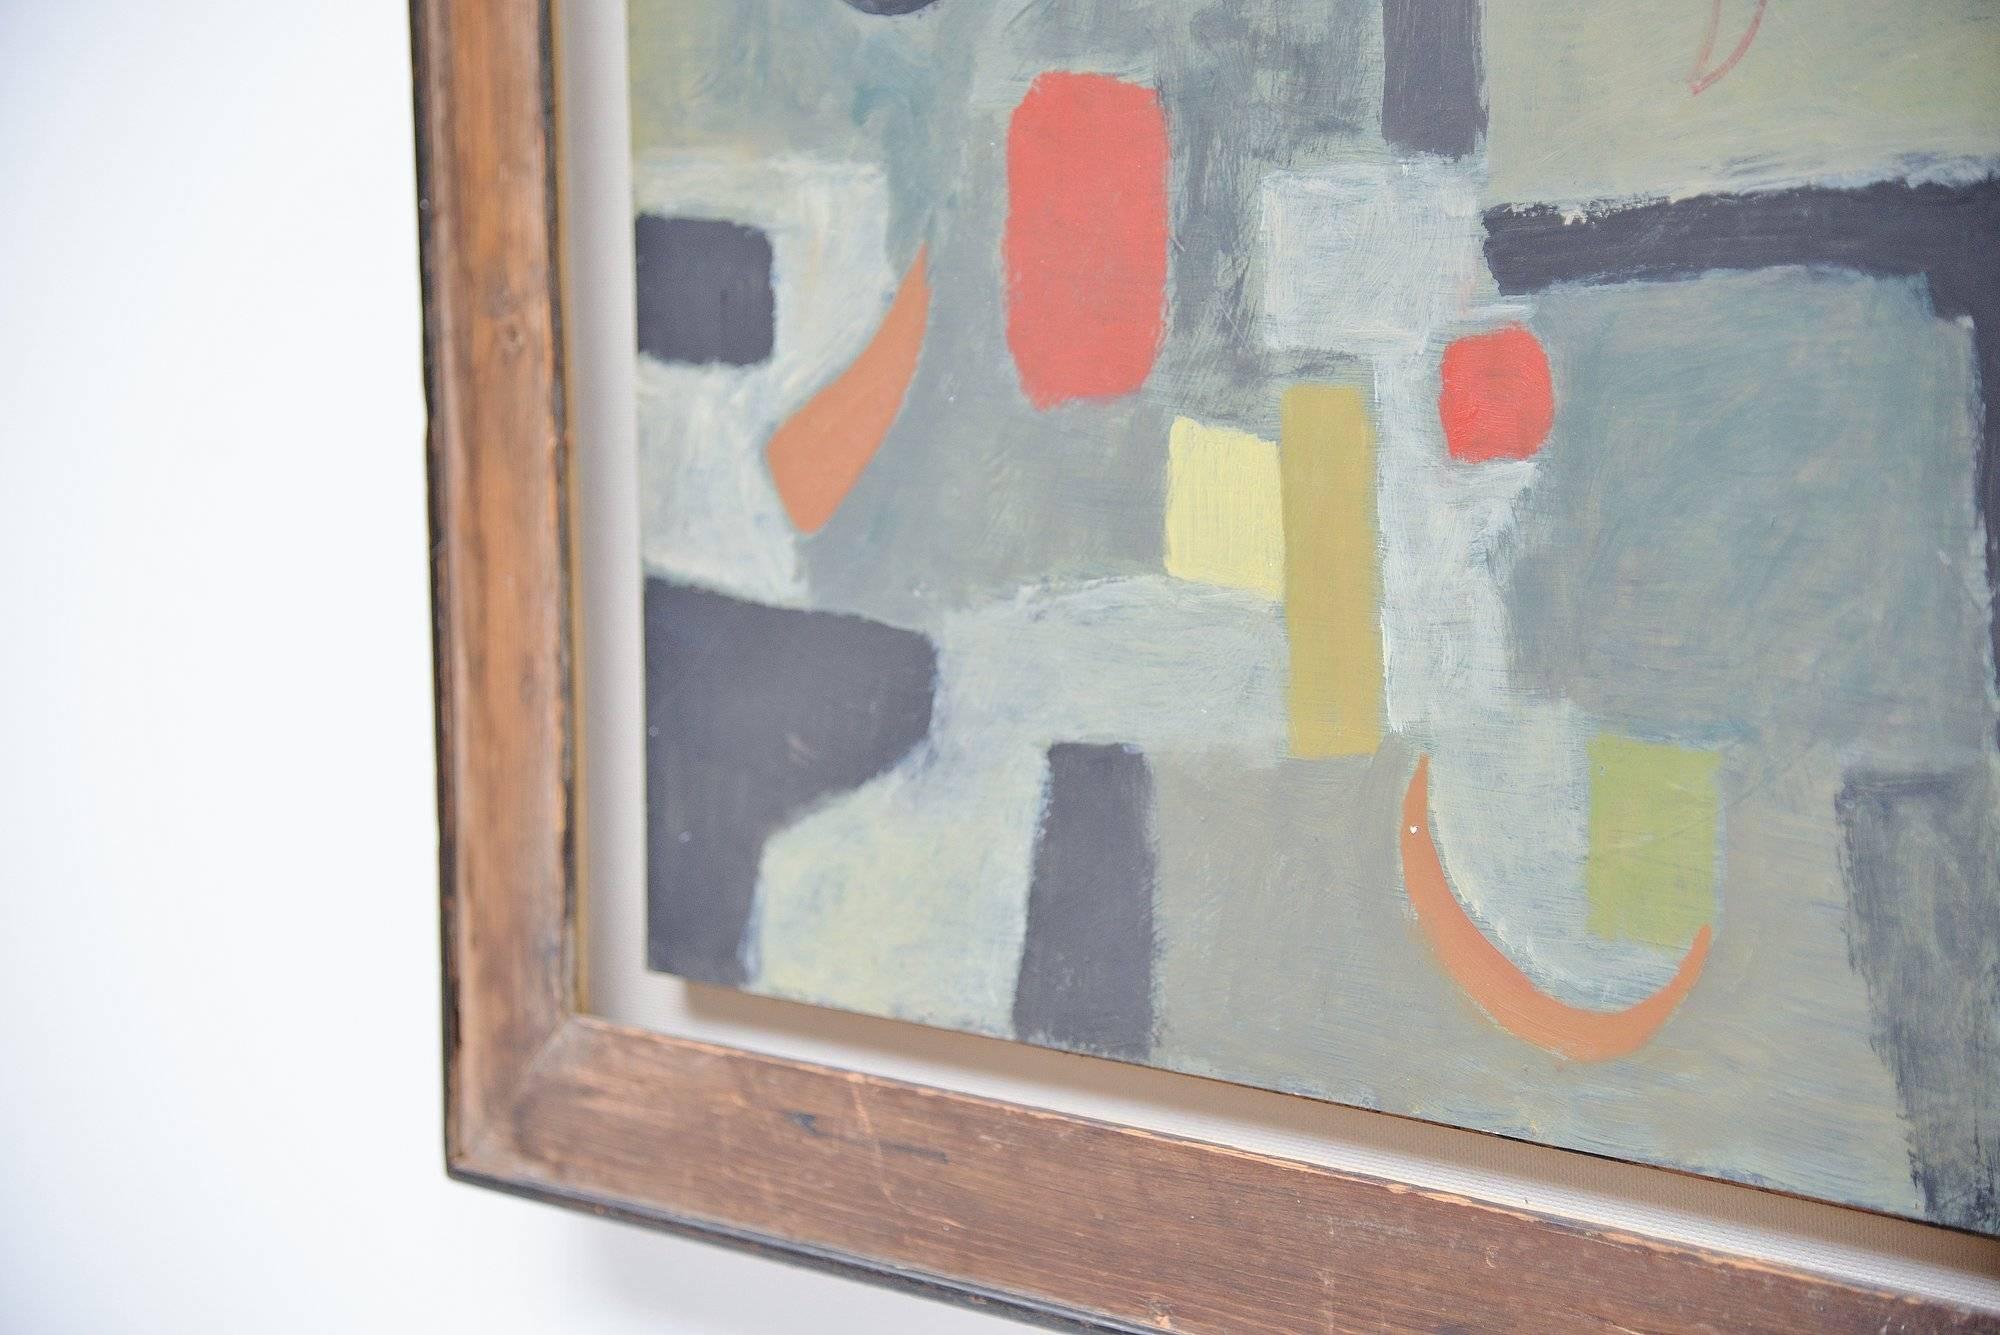 Beautiful abstract geometric untitled painting by Joao Perez, Mexico 1955. This painting is typical 1950s paintwork, sober colors, geometric figures and the original framework. Very nice and highly decorative painting from the good era. Fully